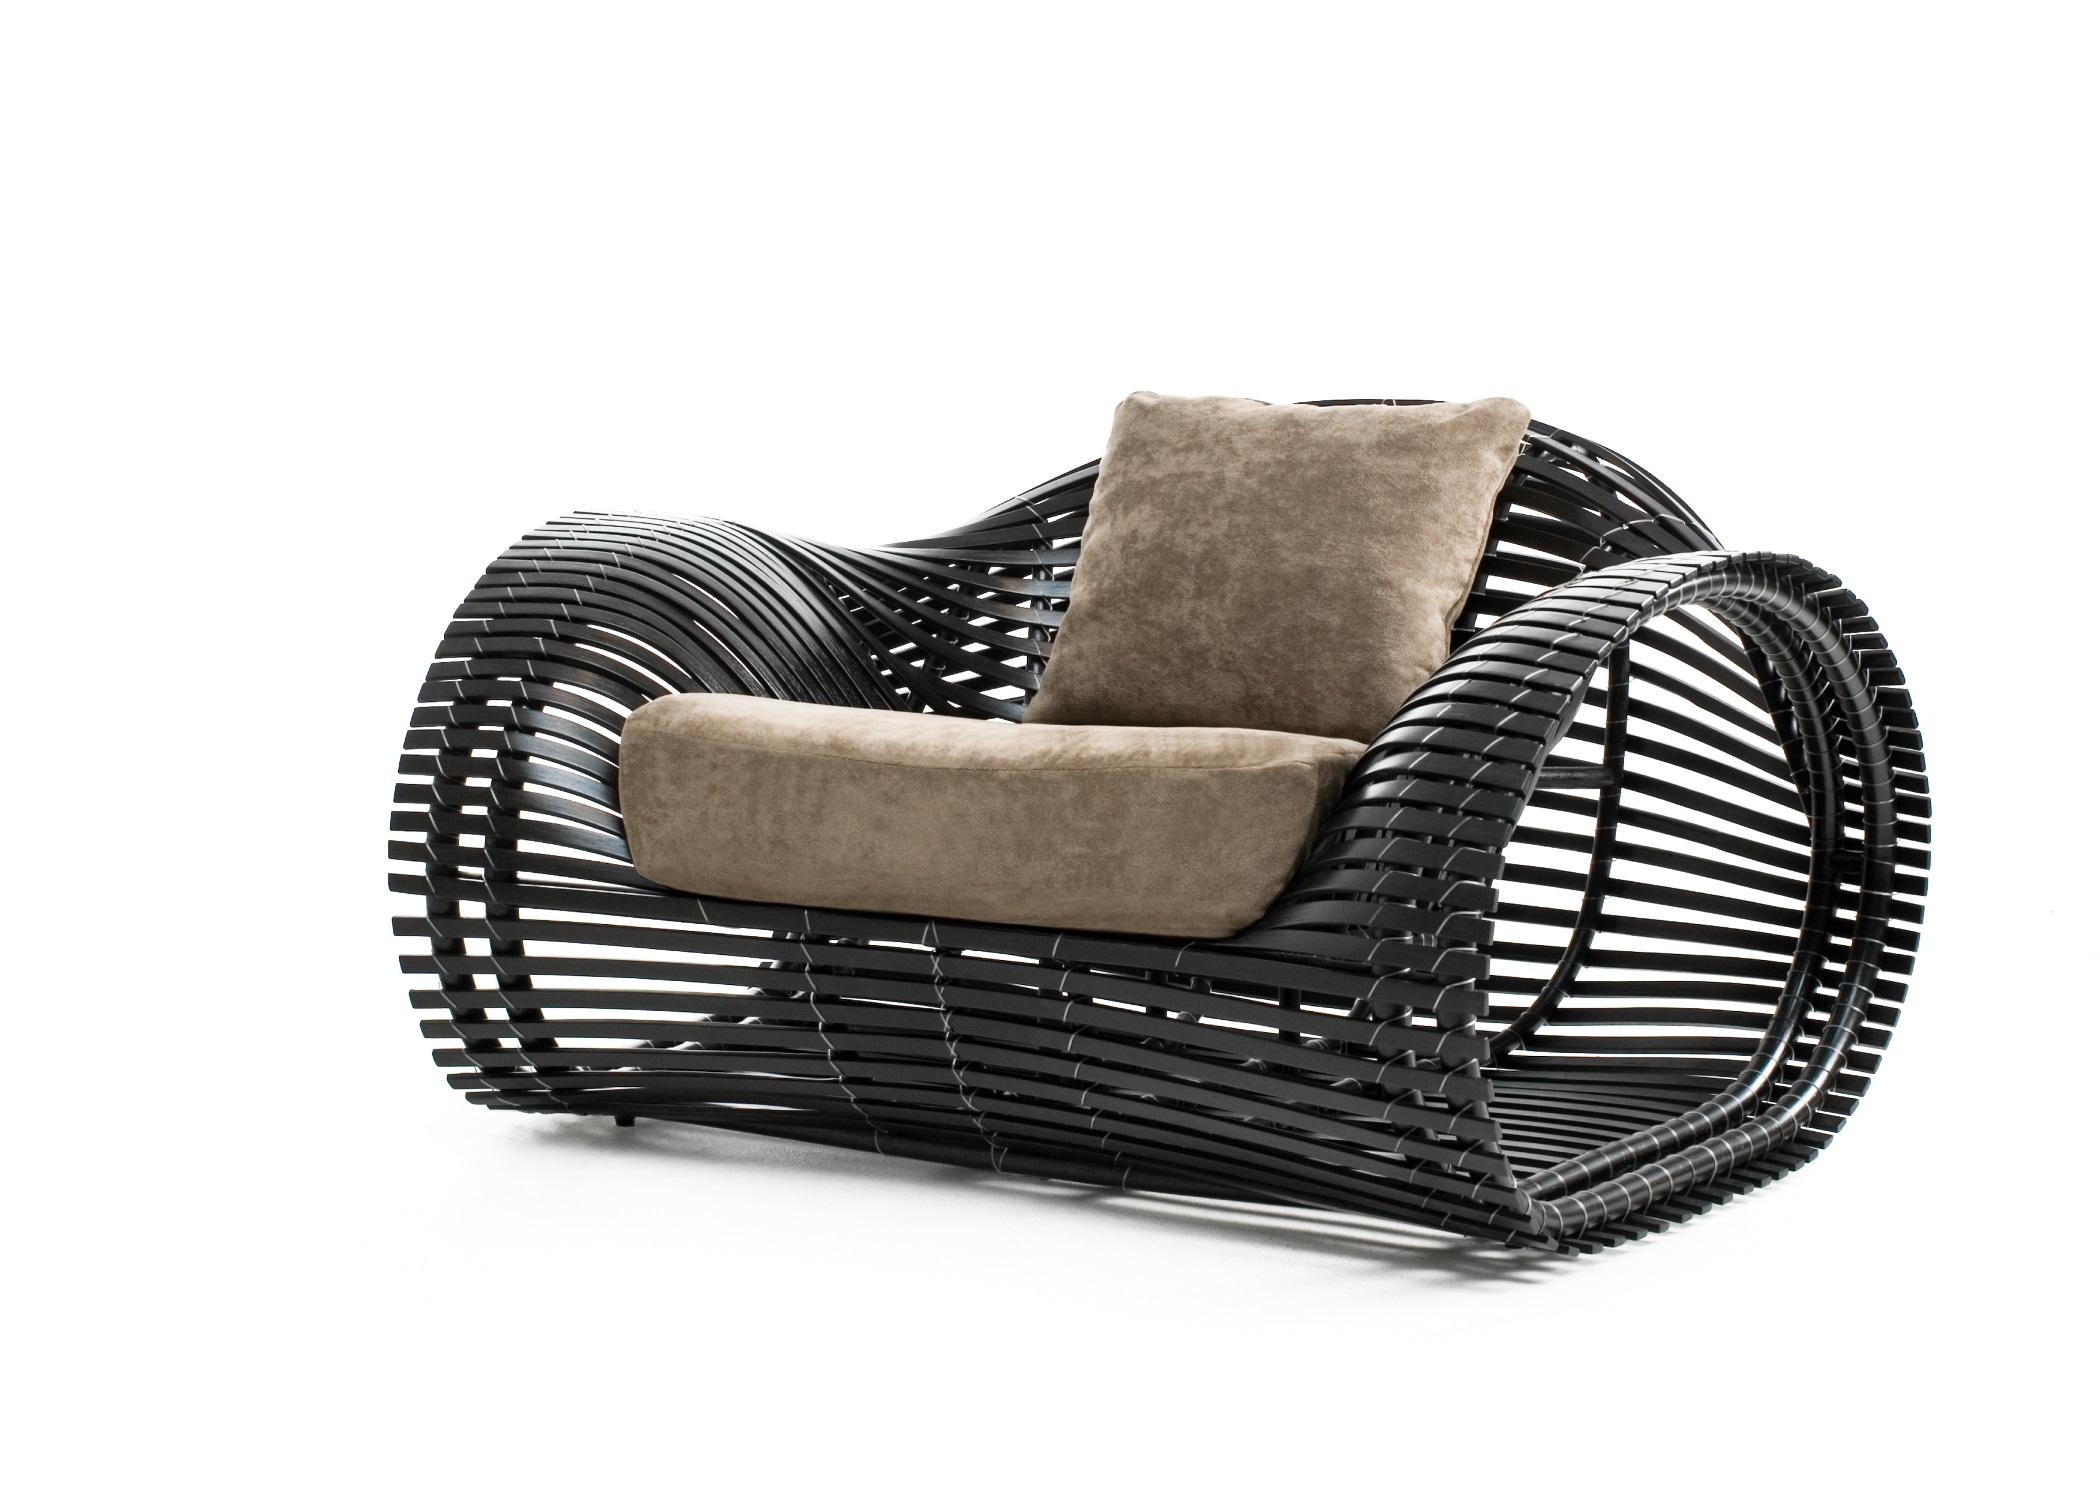 Outdoor lolah easy armchair by Kenneth Cobonpue.
Materials: polyethelene. aluminum.
Also available in other colors and for indoors.
Dimensions: 103 cm x 126 cm x H 70 cm.

Created using construction techniques similar to boat-building, lolah